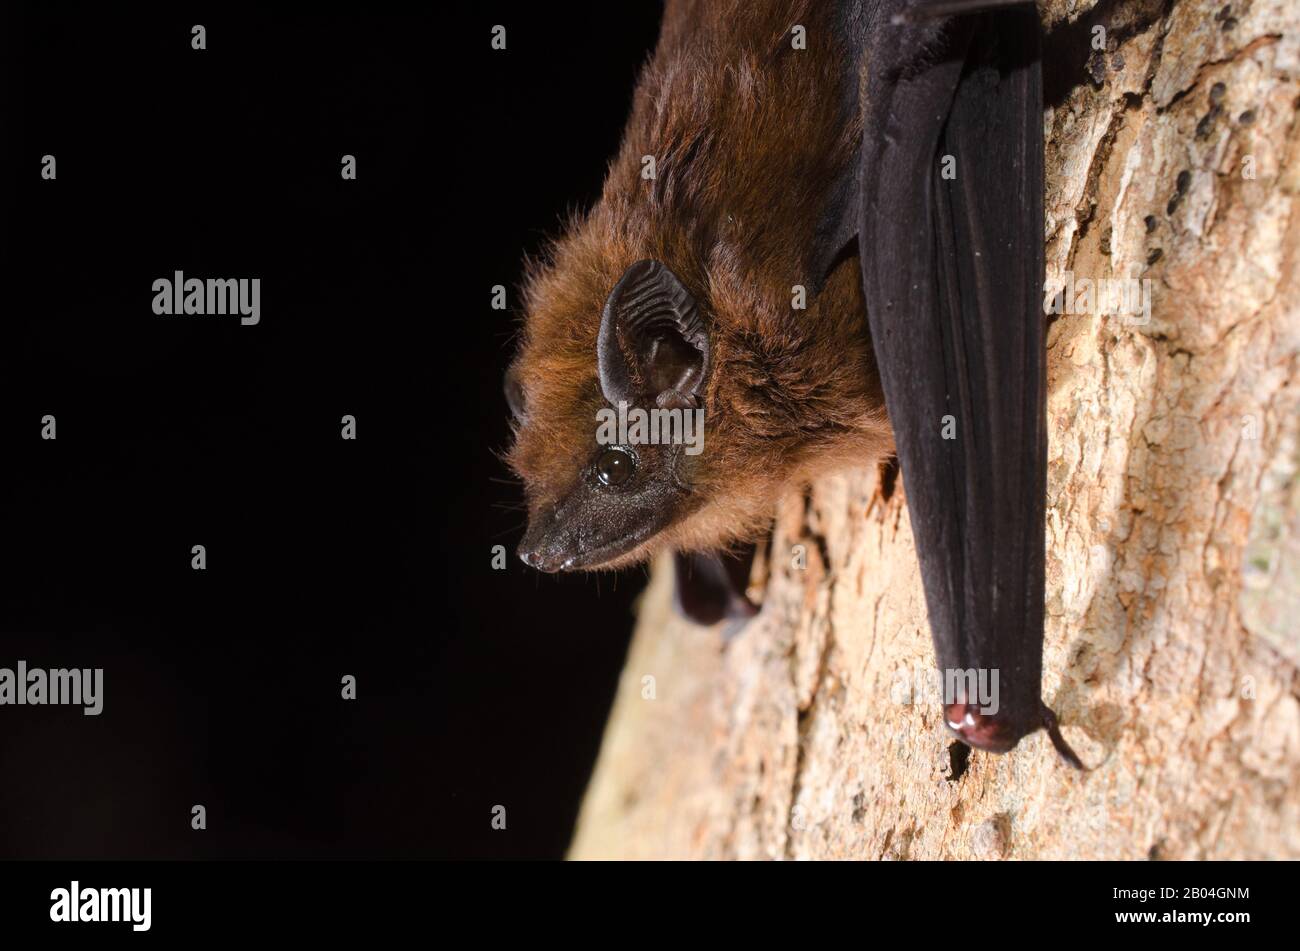 The chestnut sac-winged bat, or Wagner's sac-winged bat (Cormura brevirostris) is a species of sac-winged bat native to South and Central America. It Stock Photo